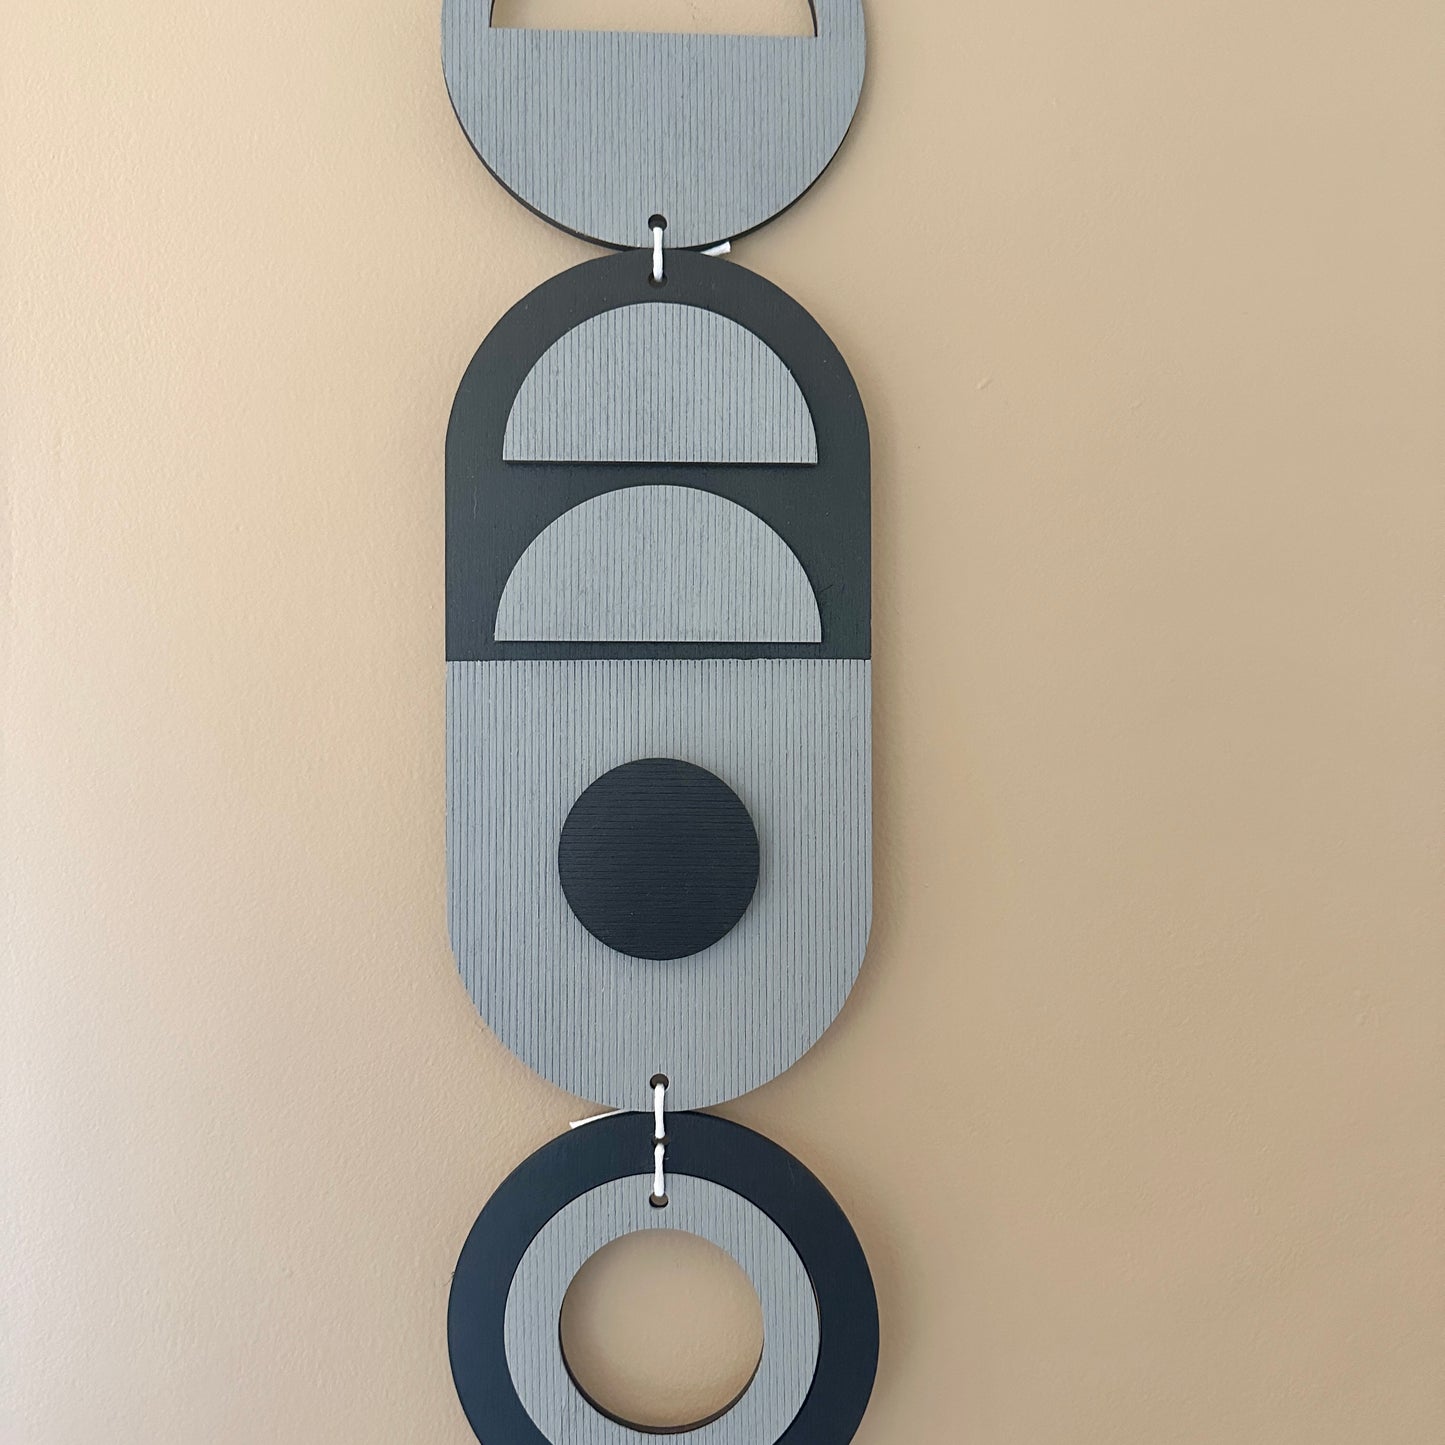 A black and grey handmade geometric wood wall hanging. In a modern Bauhaus art style. Featuring a textured effect through layer wood pieces and laser etching. Measuring 68cm in length x 10cm wide